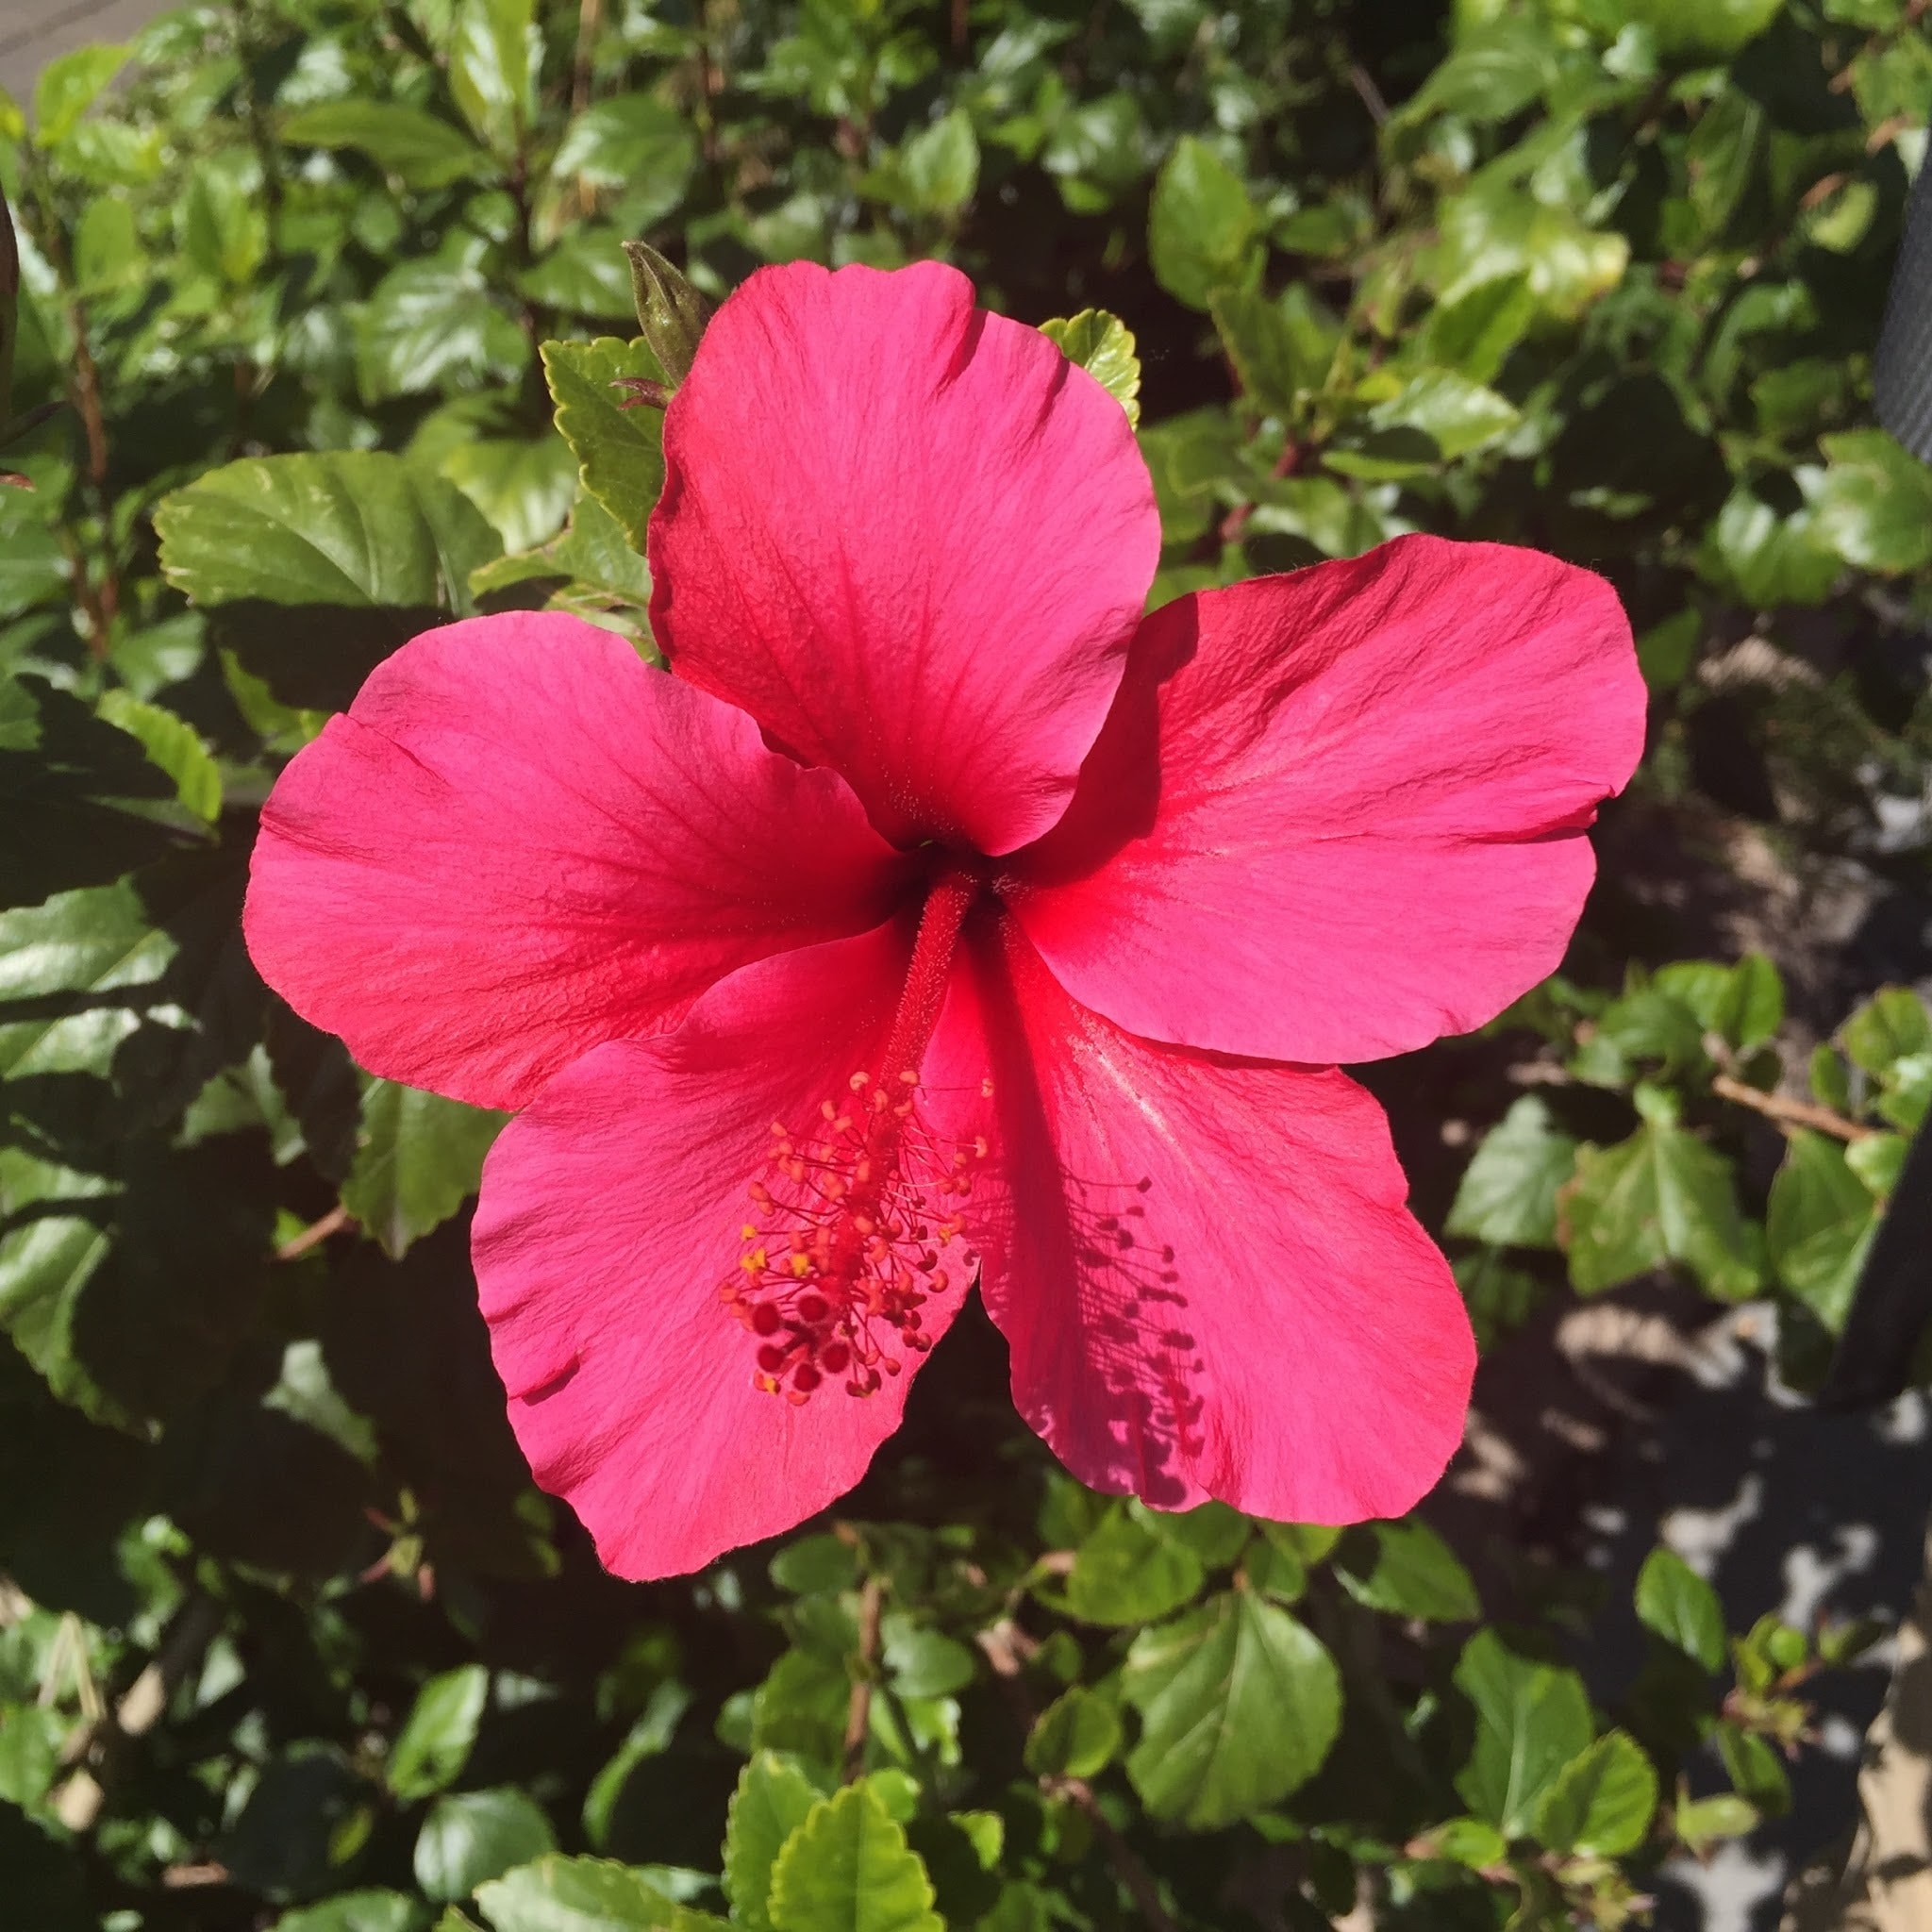 closed up photo of red petaled flower